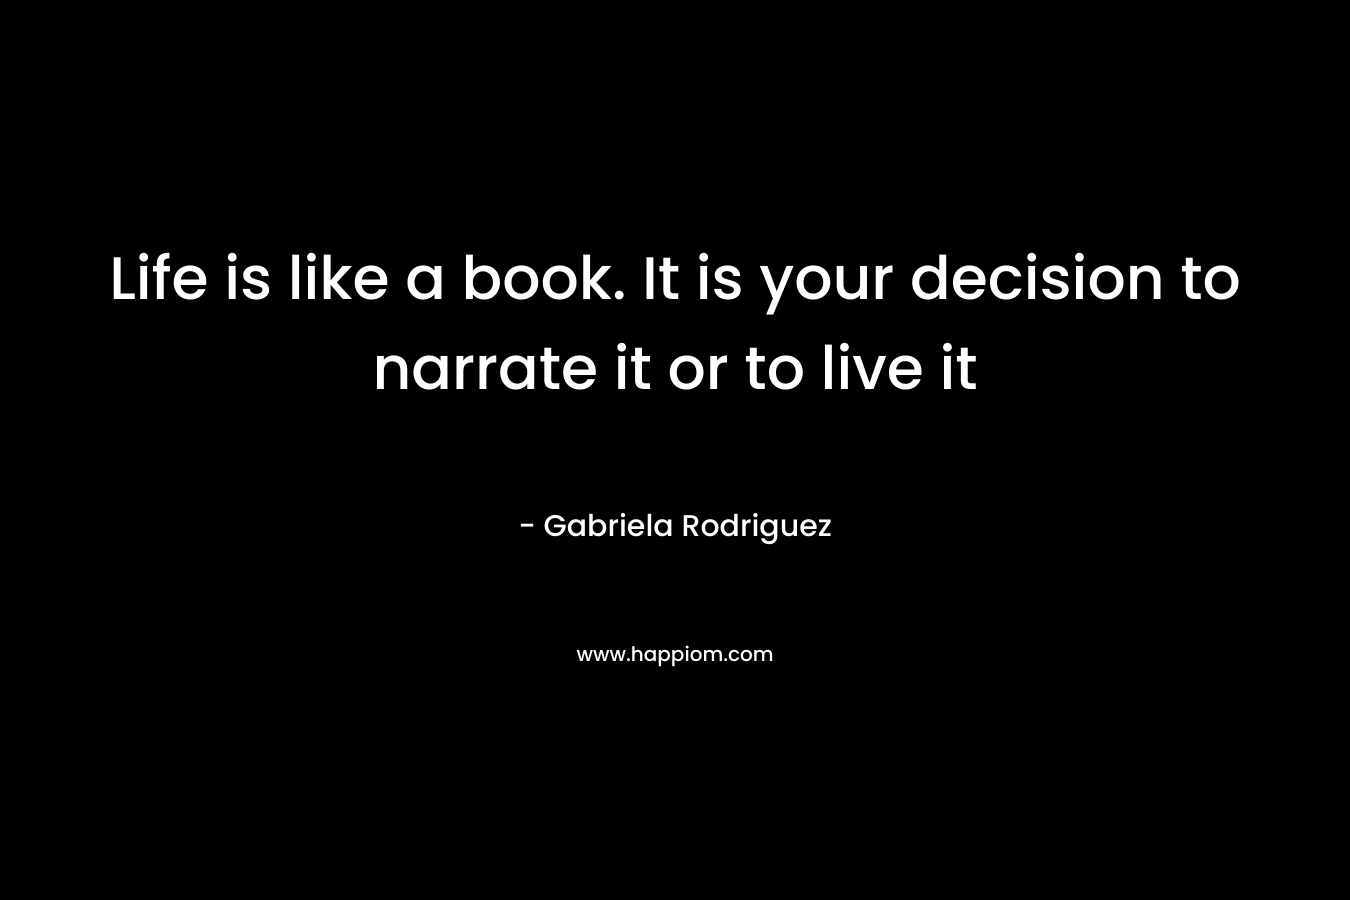 Life is like a book. It is your decision to narrate it or to live it – Gabriela Rodriguez